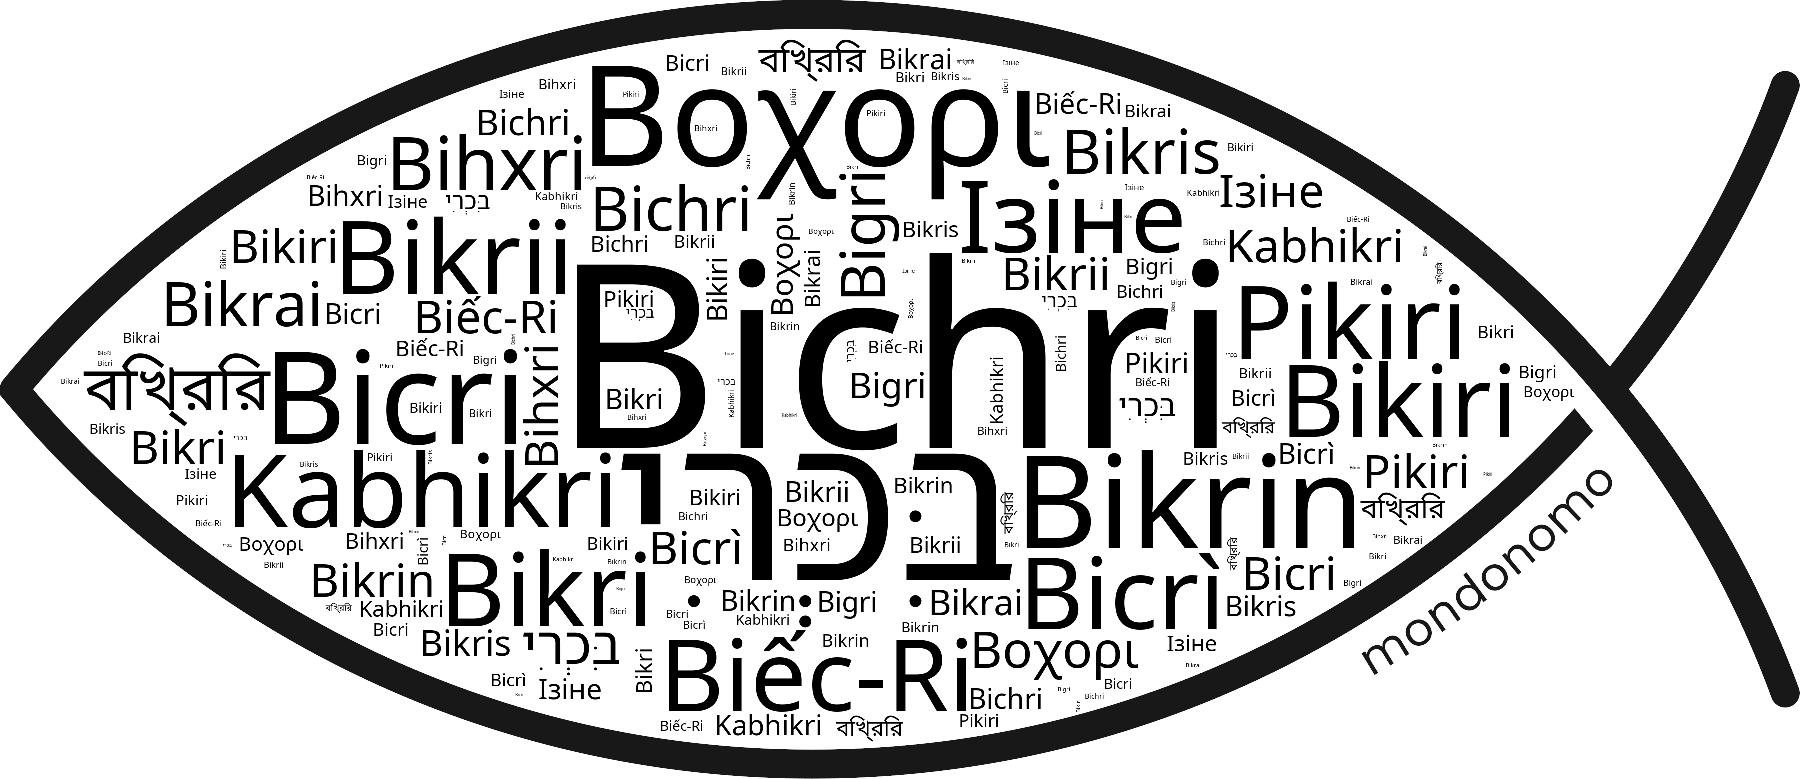 Name Bichri in the world's Bibles